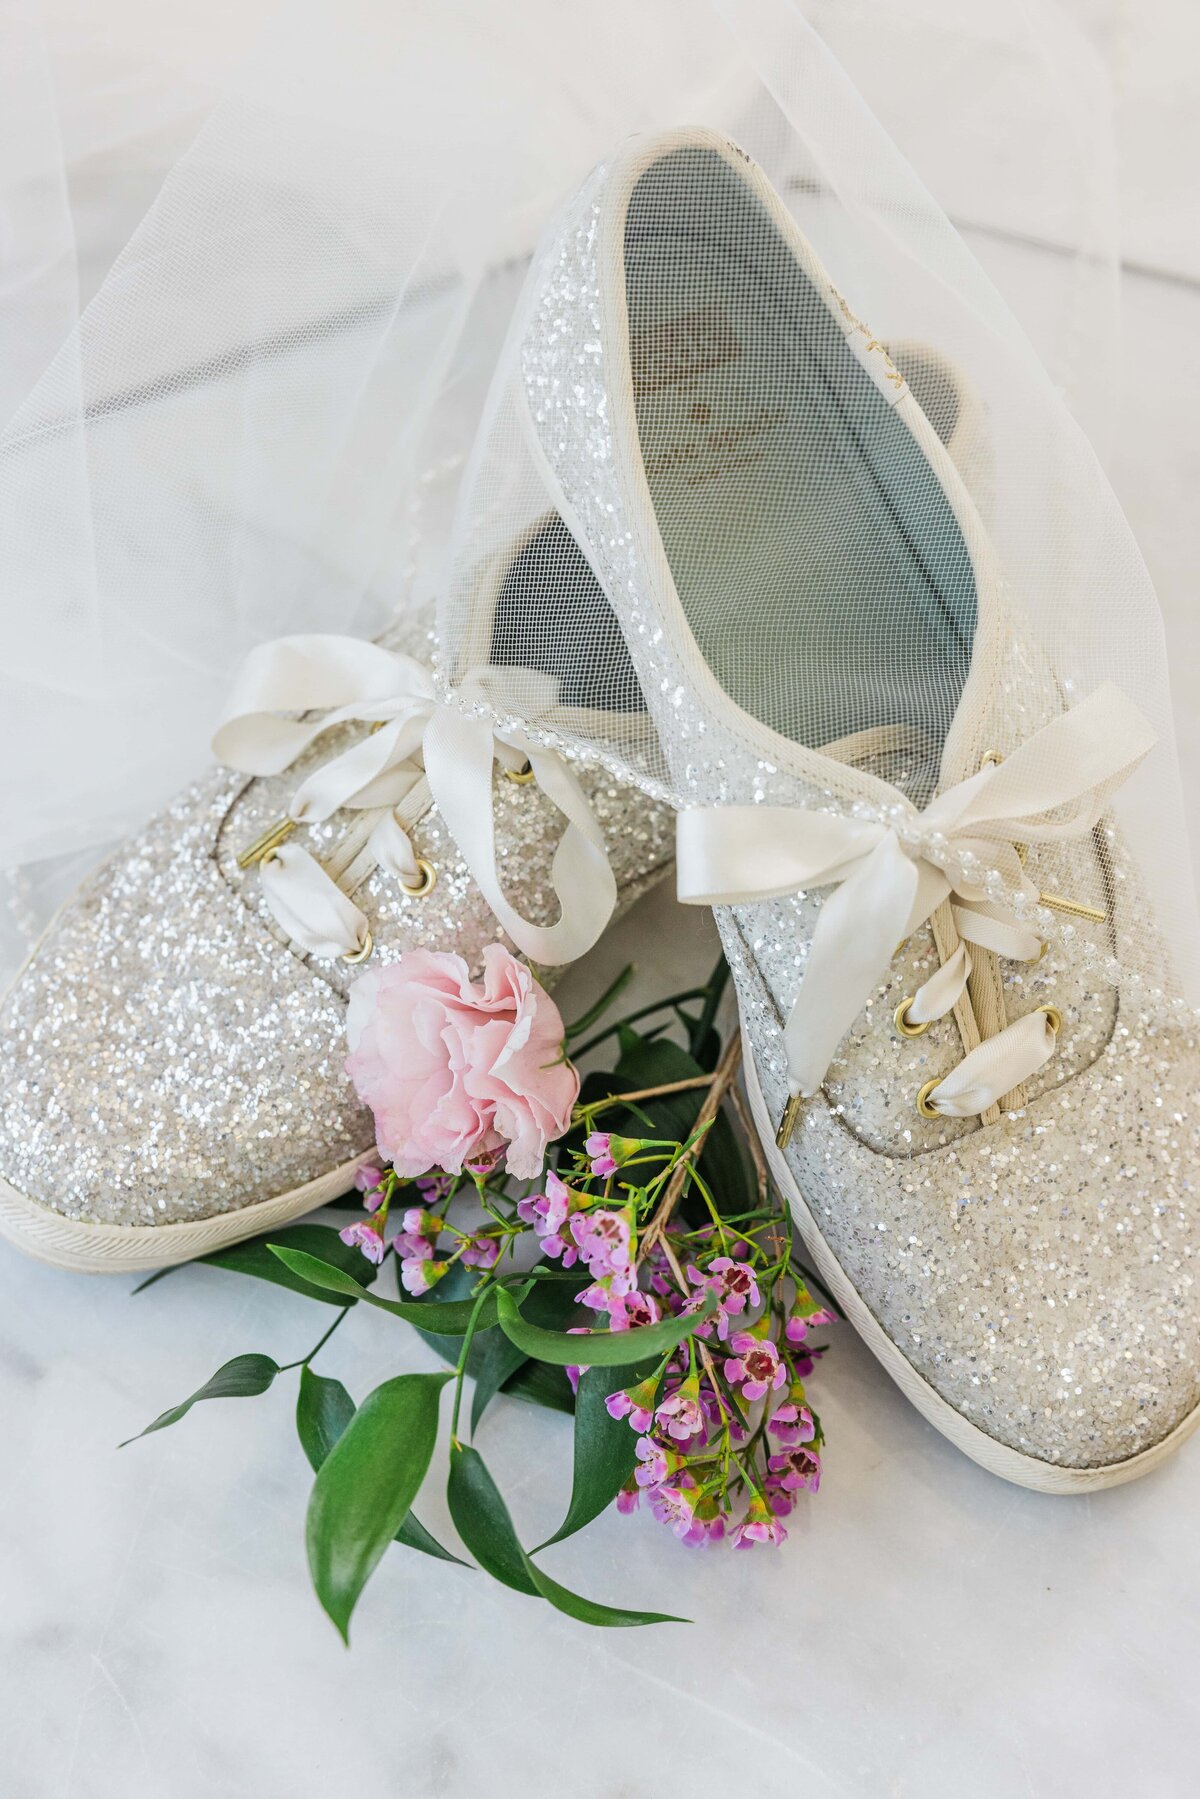 A pair of glittery bridal shoes adorned with bows, accompanied by a small bouquet of pink and purple flowers on a marble surface, perfectly curated for a Park Farm Winery wedding.